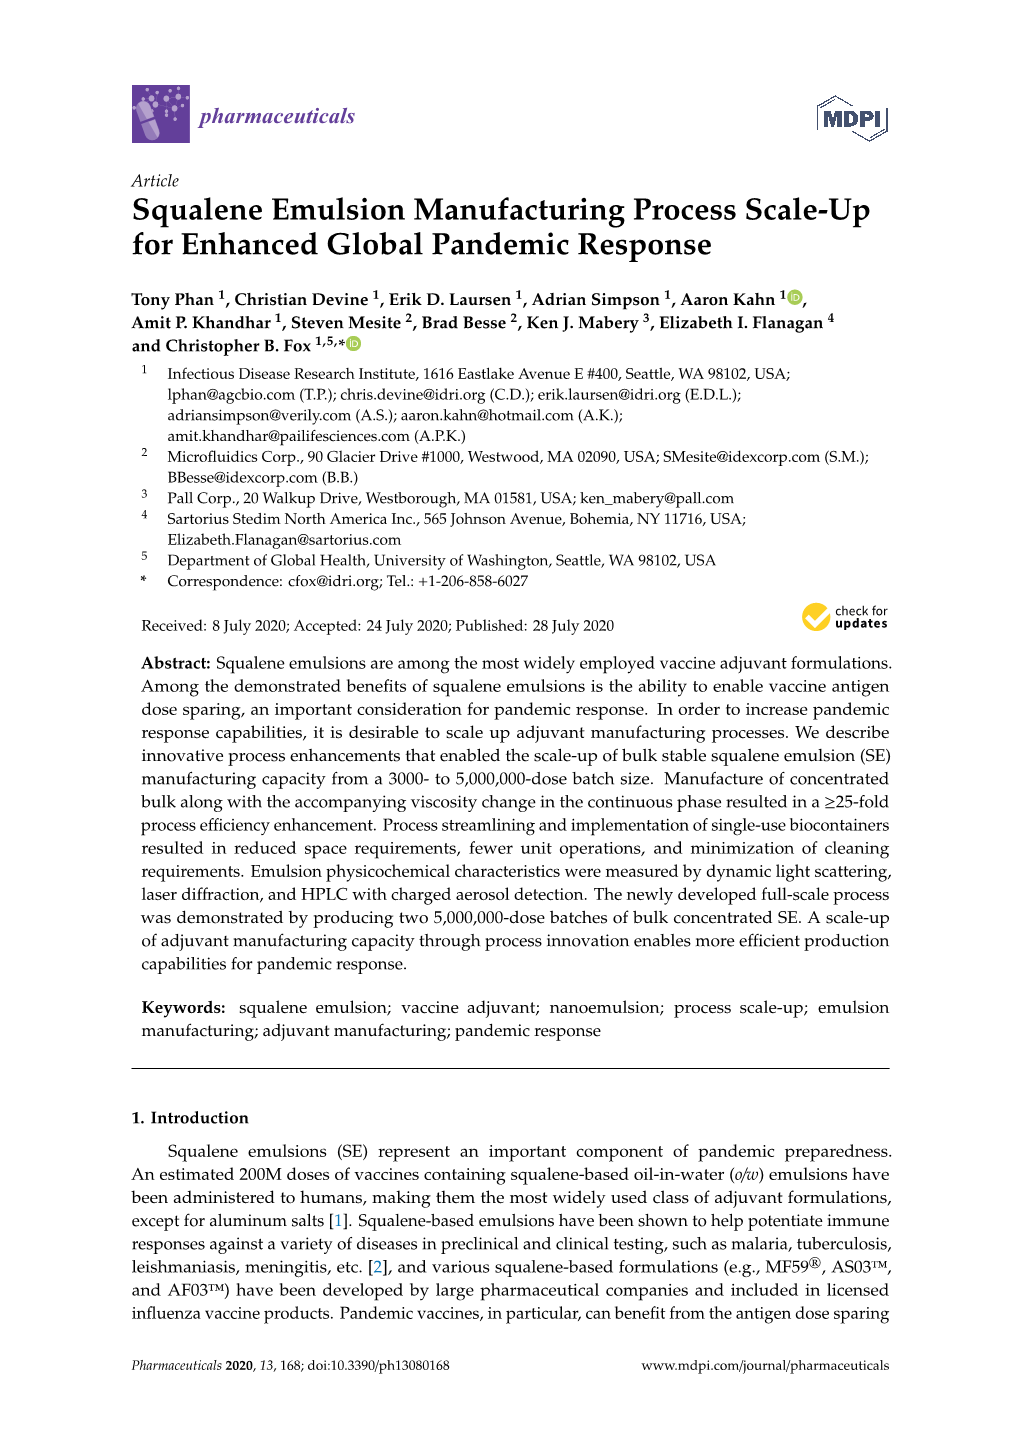 Squalene Emulsion Manufacturing Process Scale-Up for Enhanced Global Pandemic Response